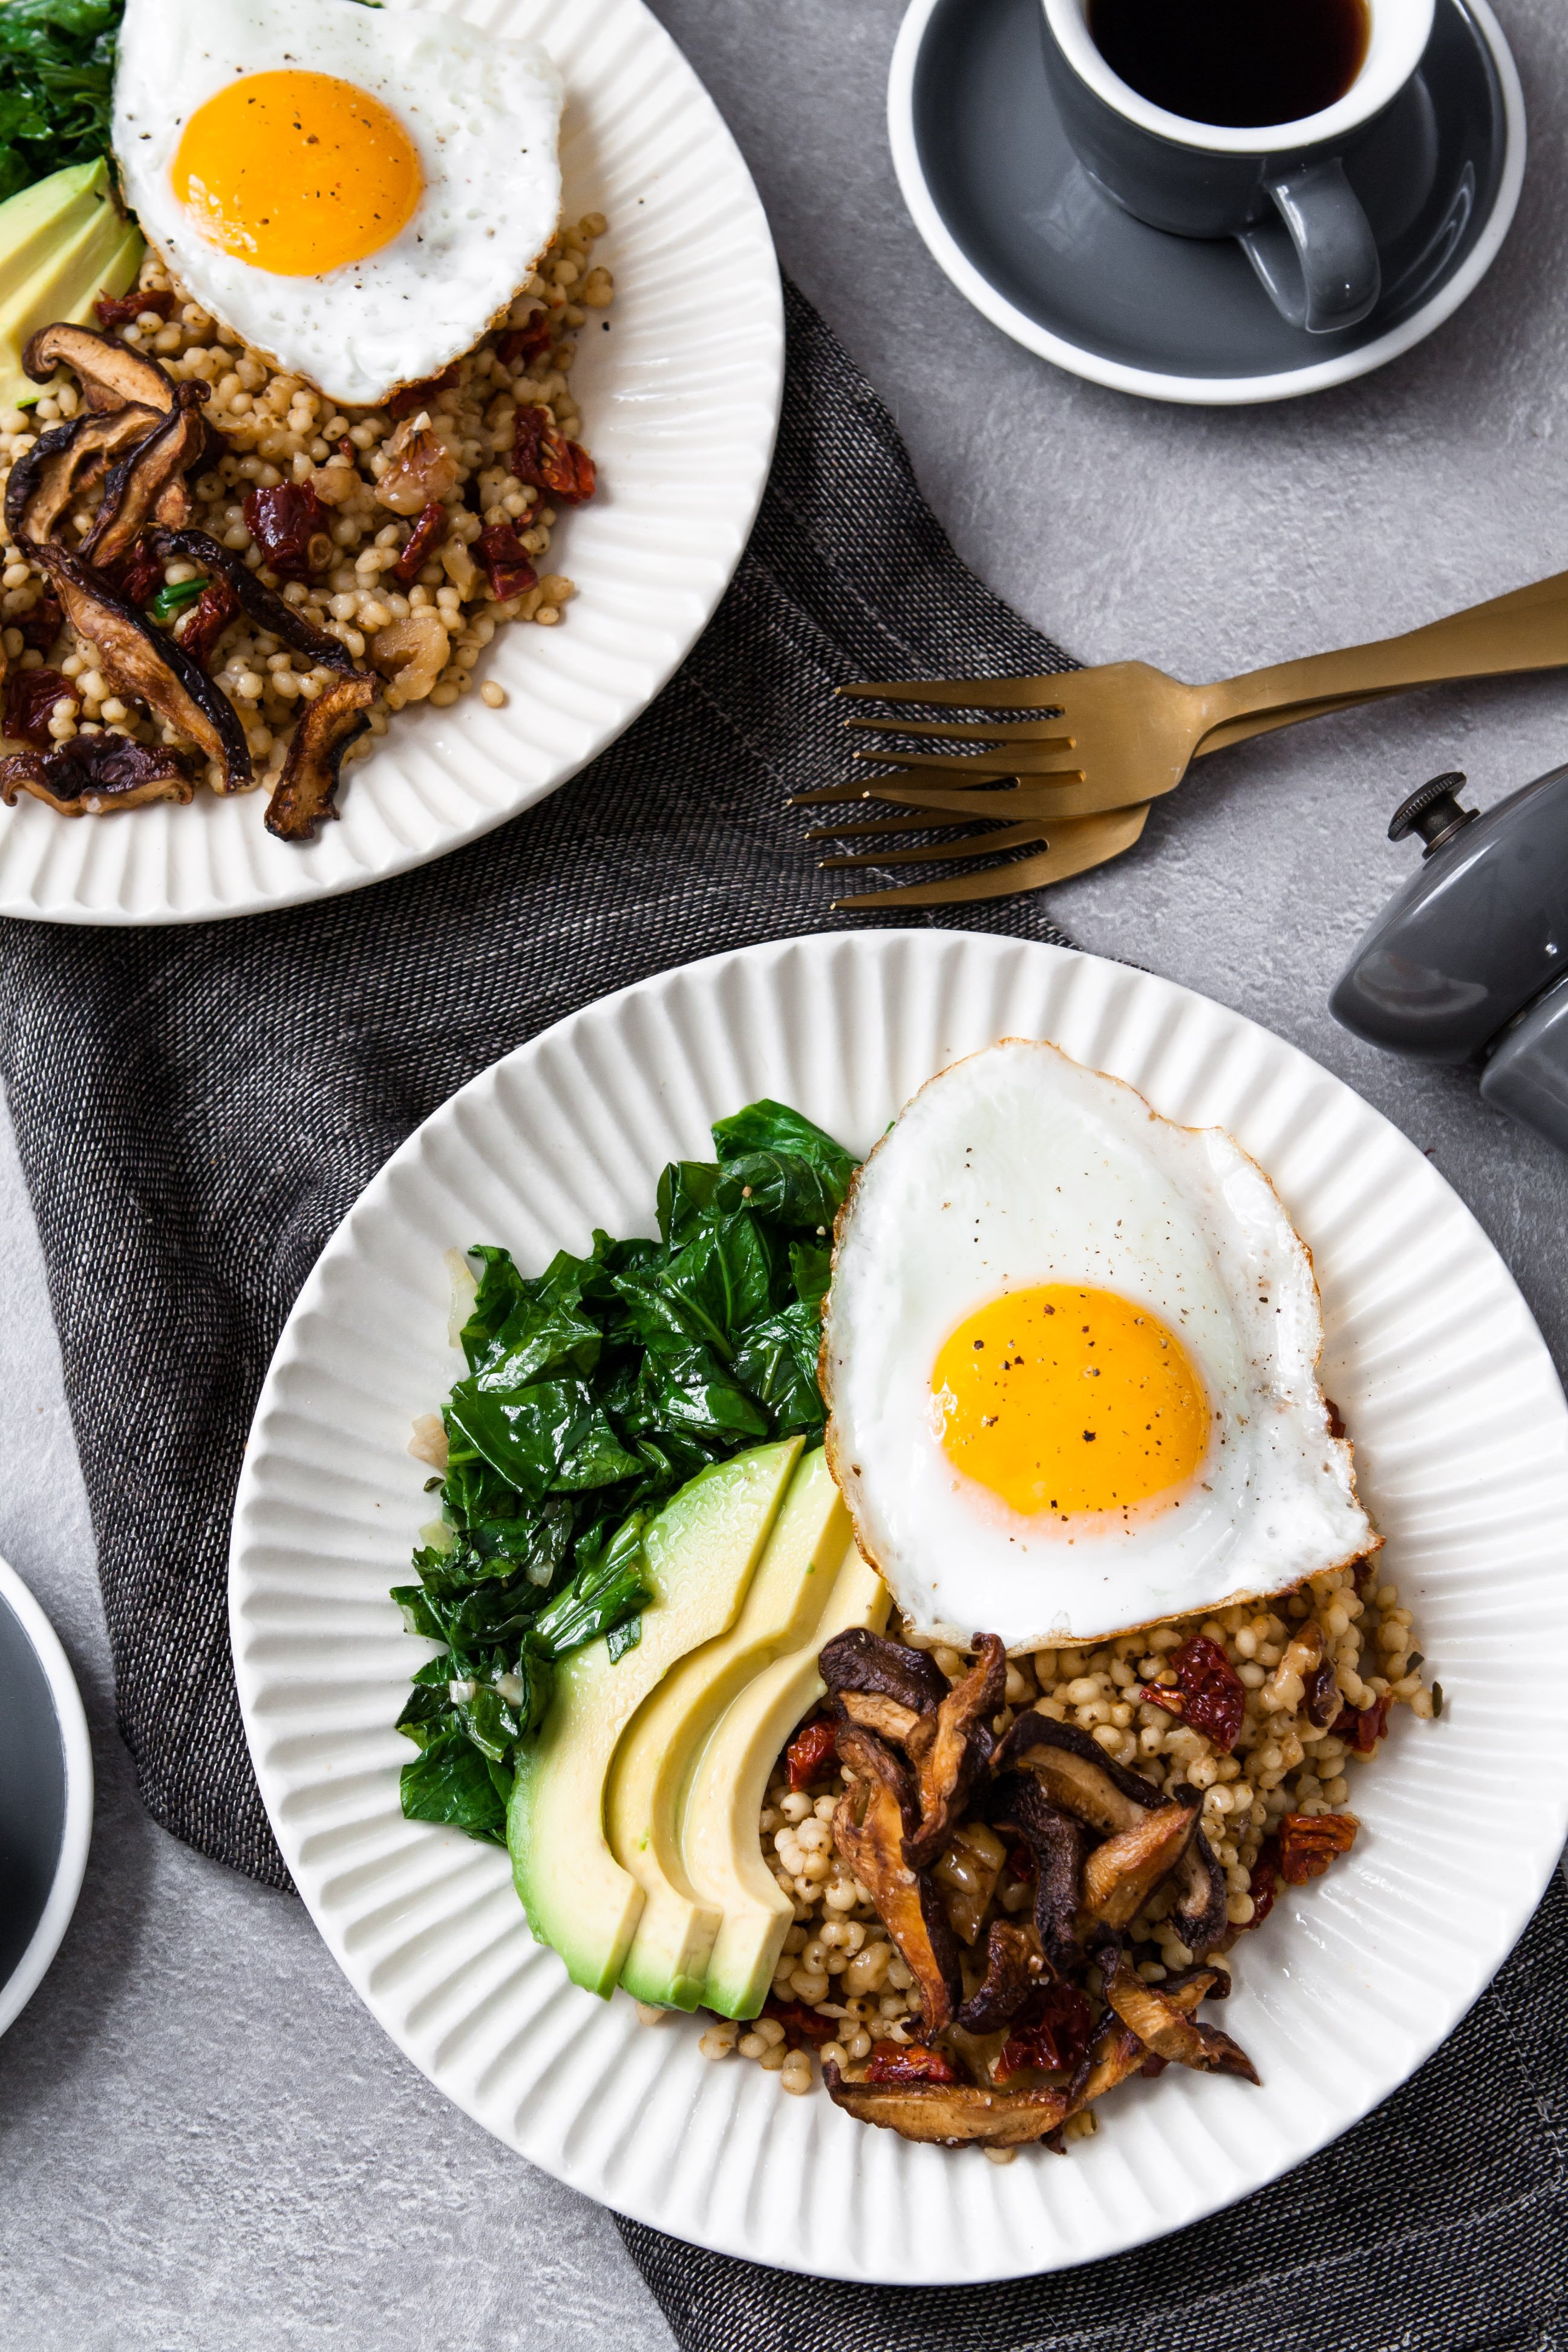 two white bowls filled with grains, sautéed greens, sliced avocado, and topped with a sunny side up egg